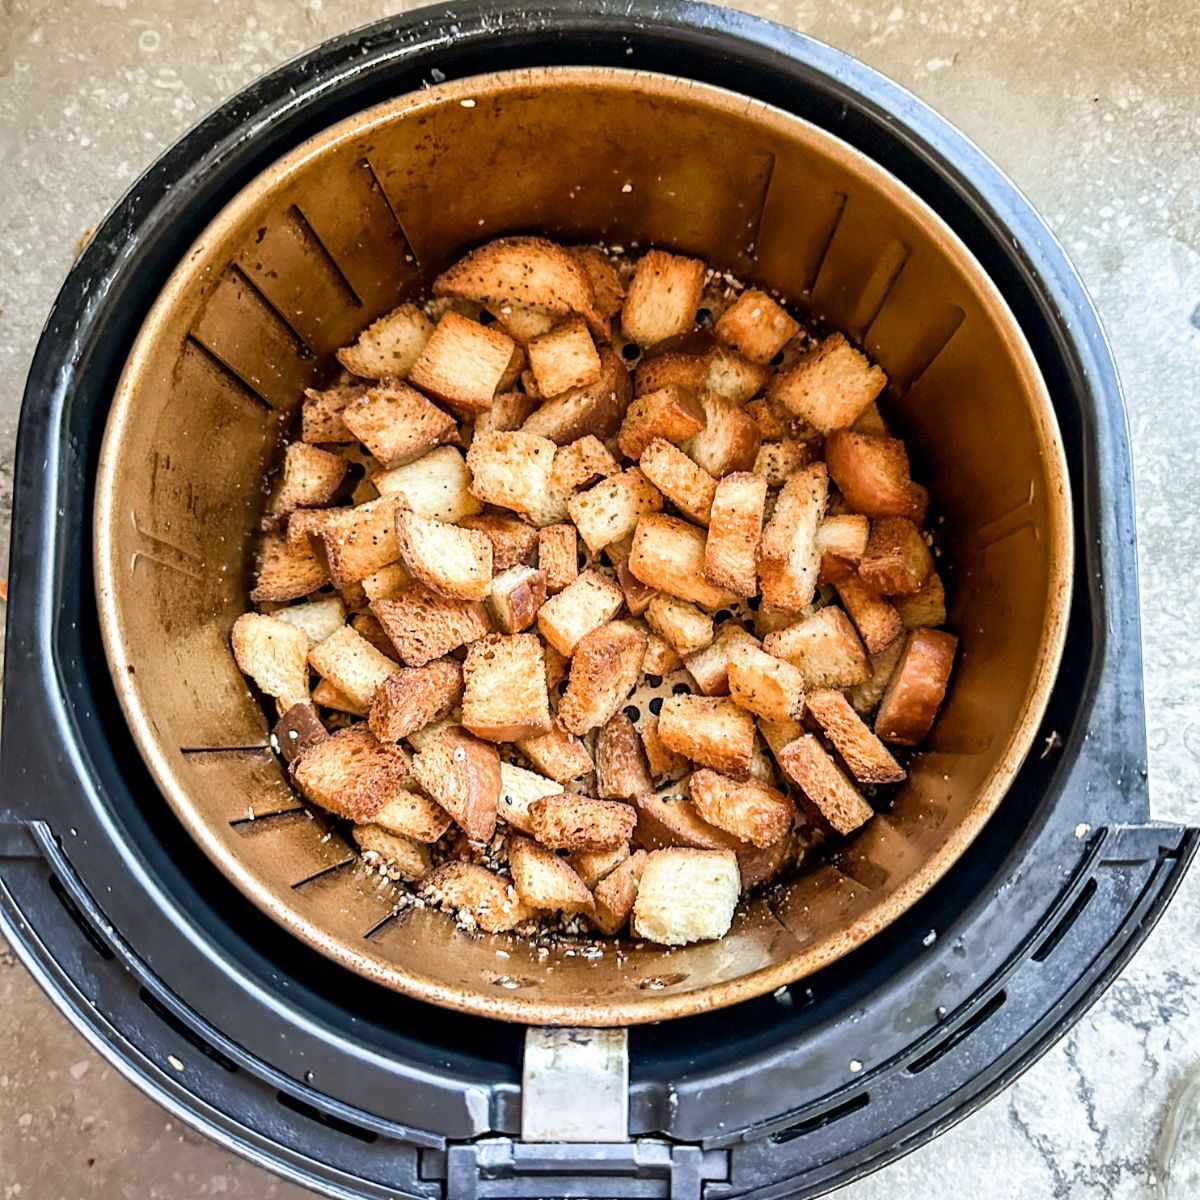 croutons just out of the air fryer.